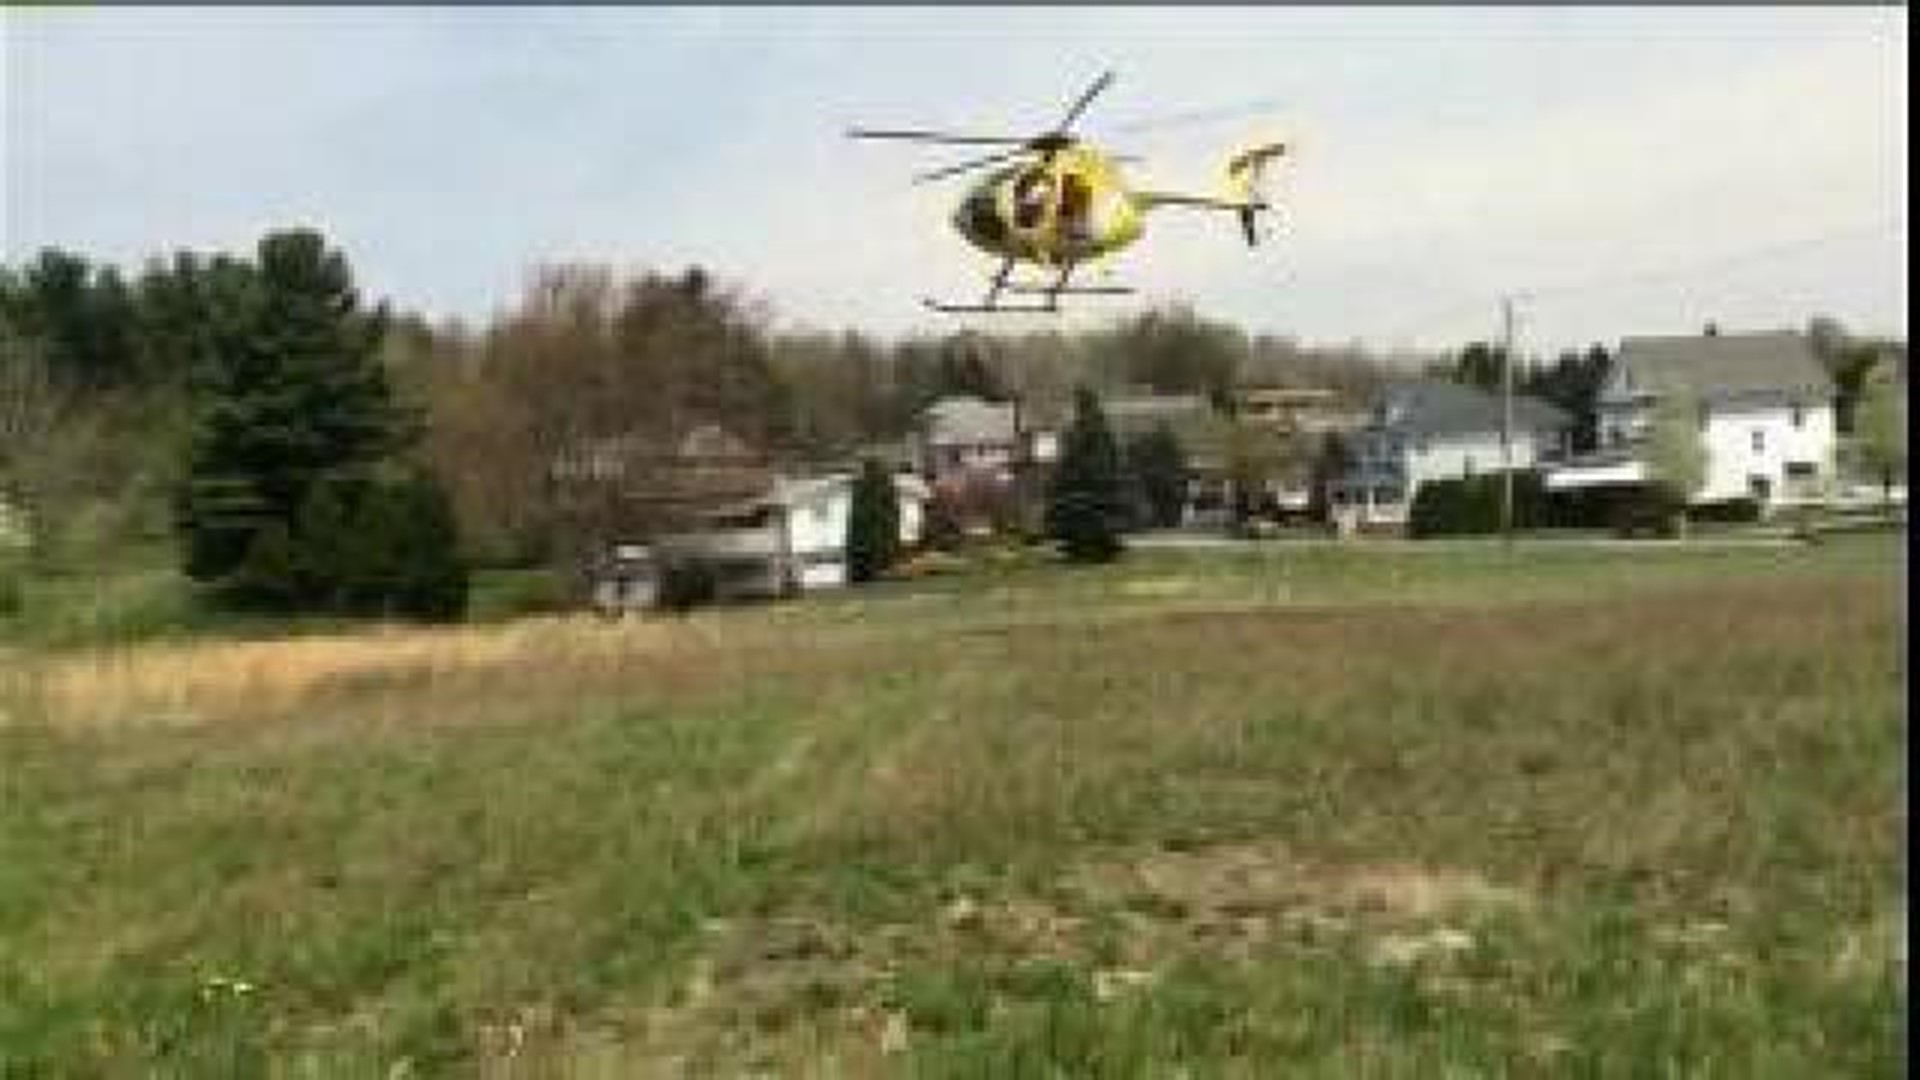 Chopper Lands In Throop, Causes Commotion